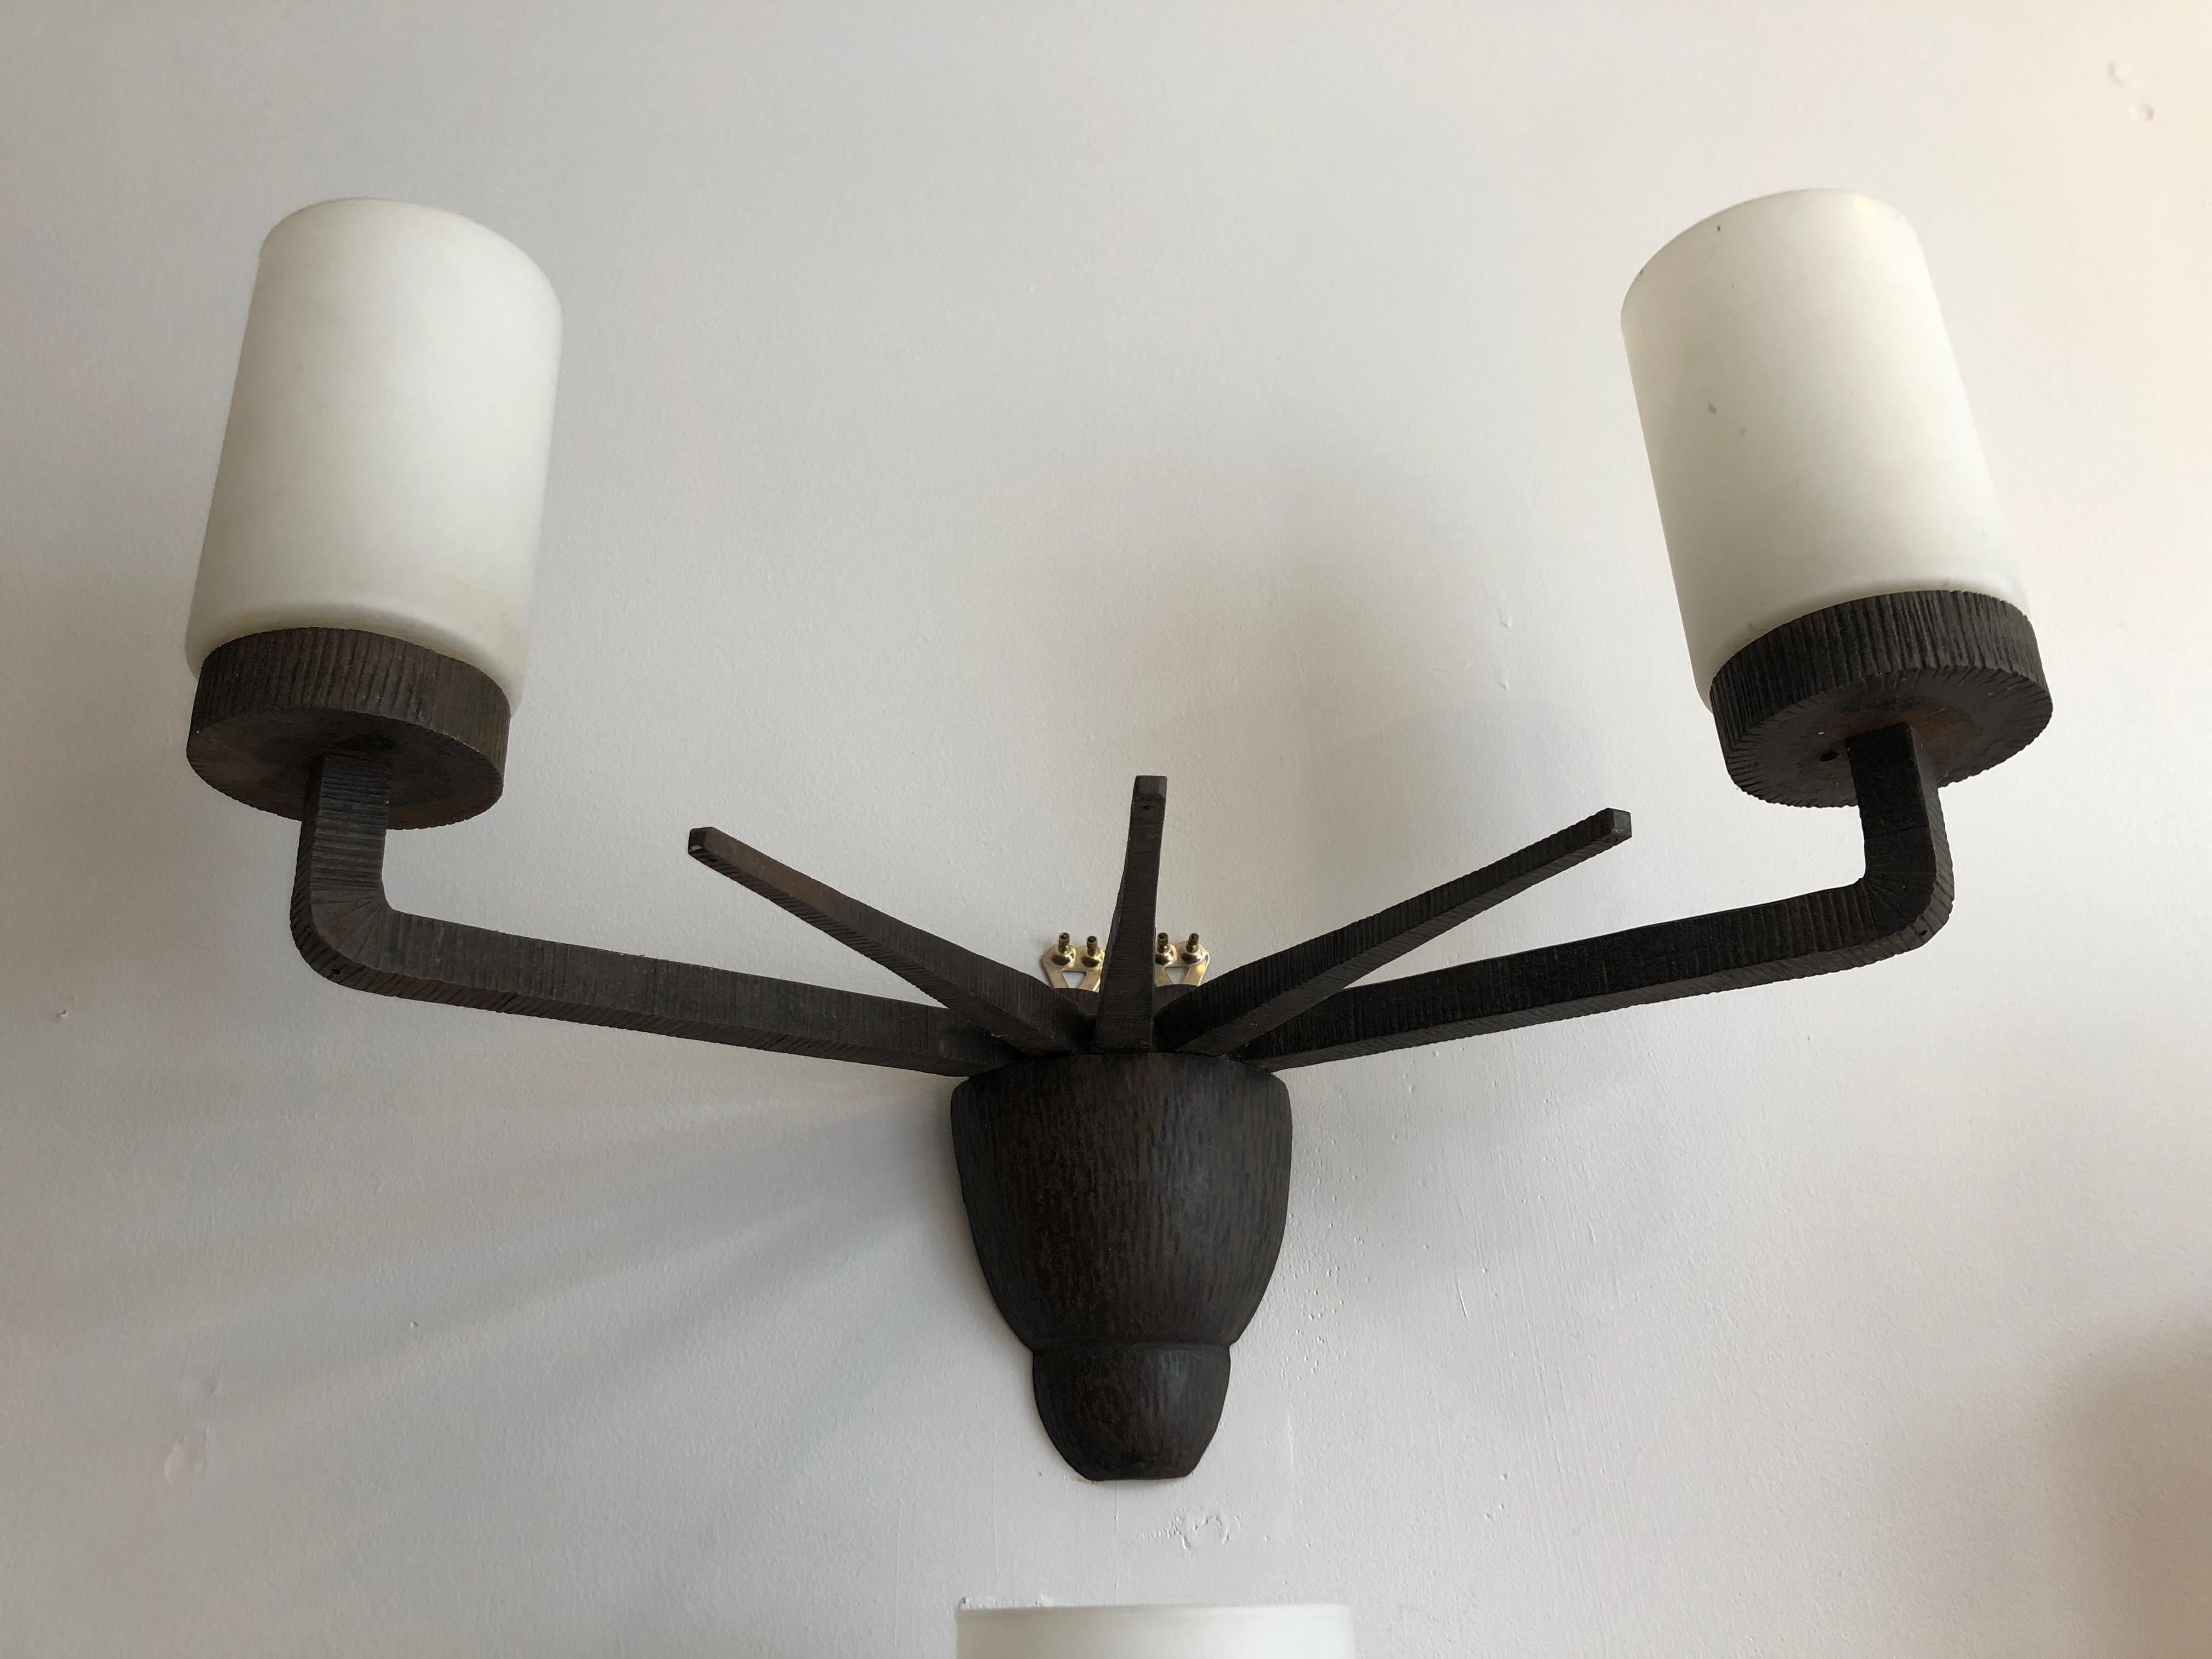 Art Deco modernist Gothic design recalls the Statue of Liberty, with its spiked crown and raised torches. Hand-worked wrought iron two-arm sconces, with original patina and milk glass shades. Unsigned, but high quality craftsmanship.